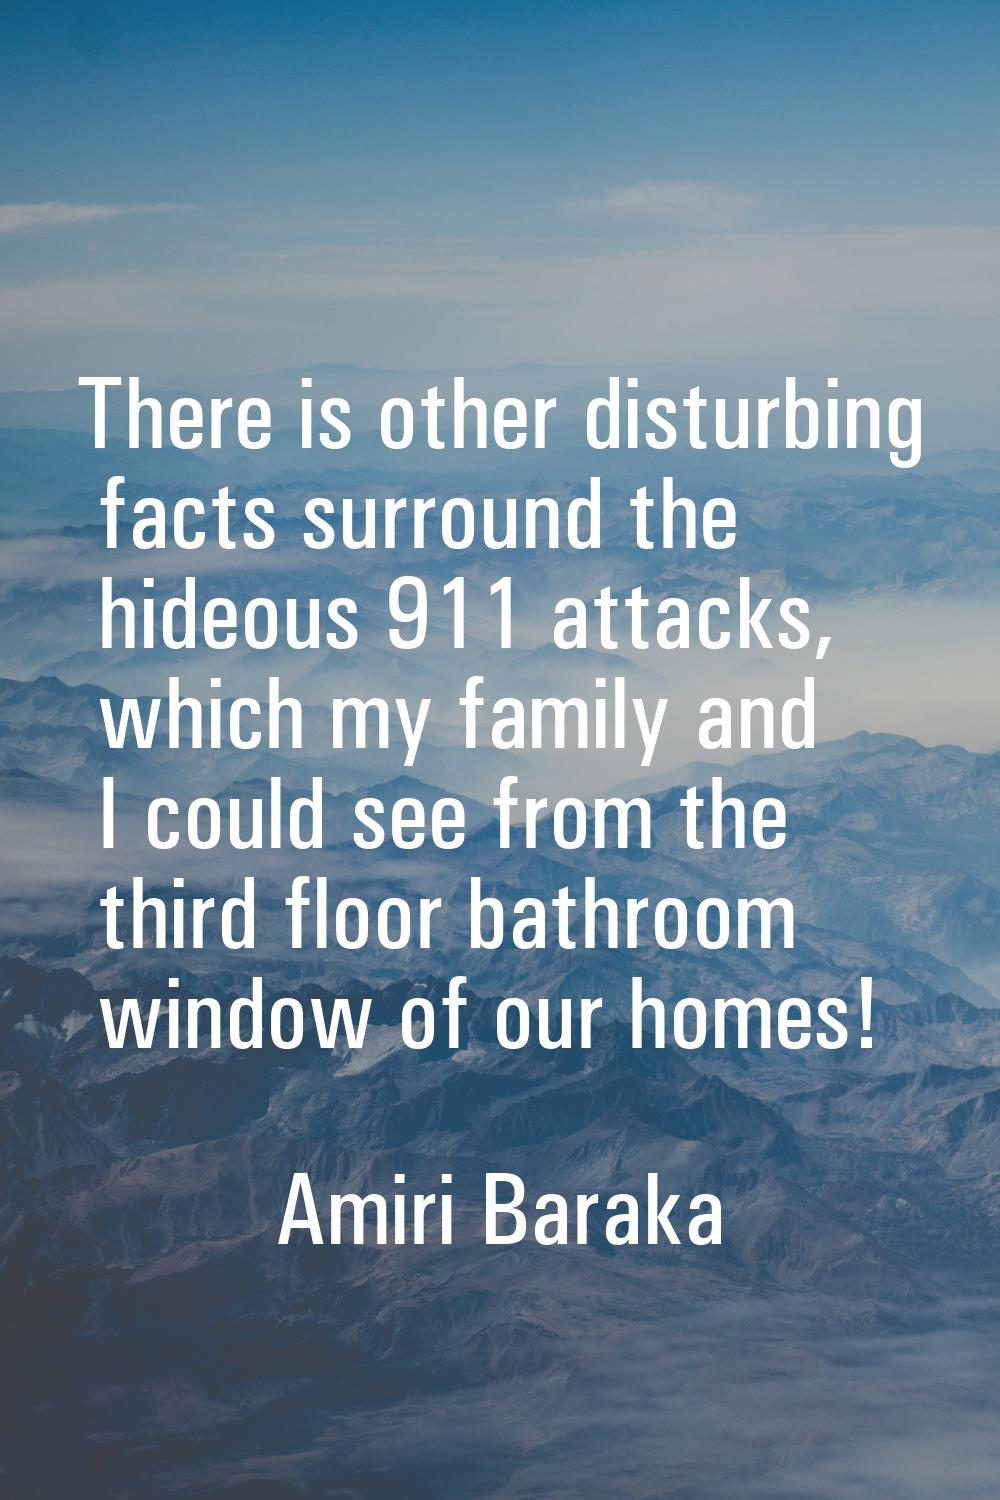 There is other disturbing facts surround the hideous 911 attacks, which my family and I could see f